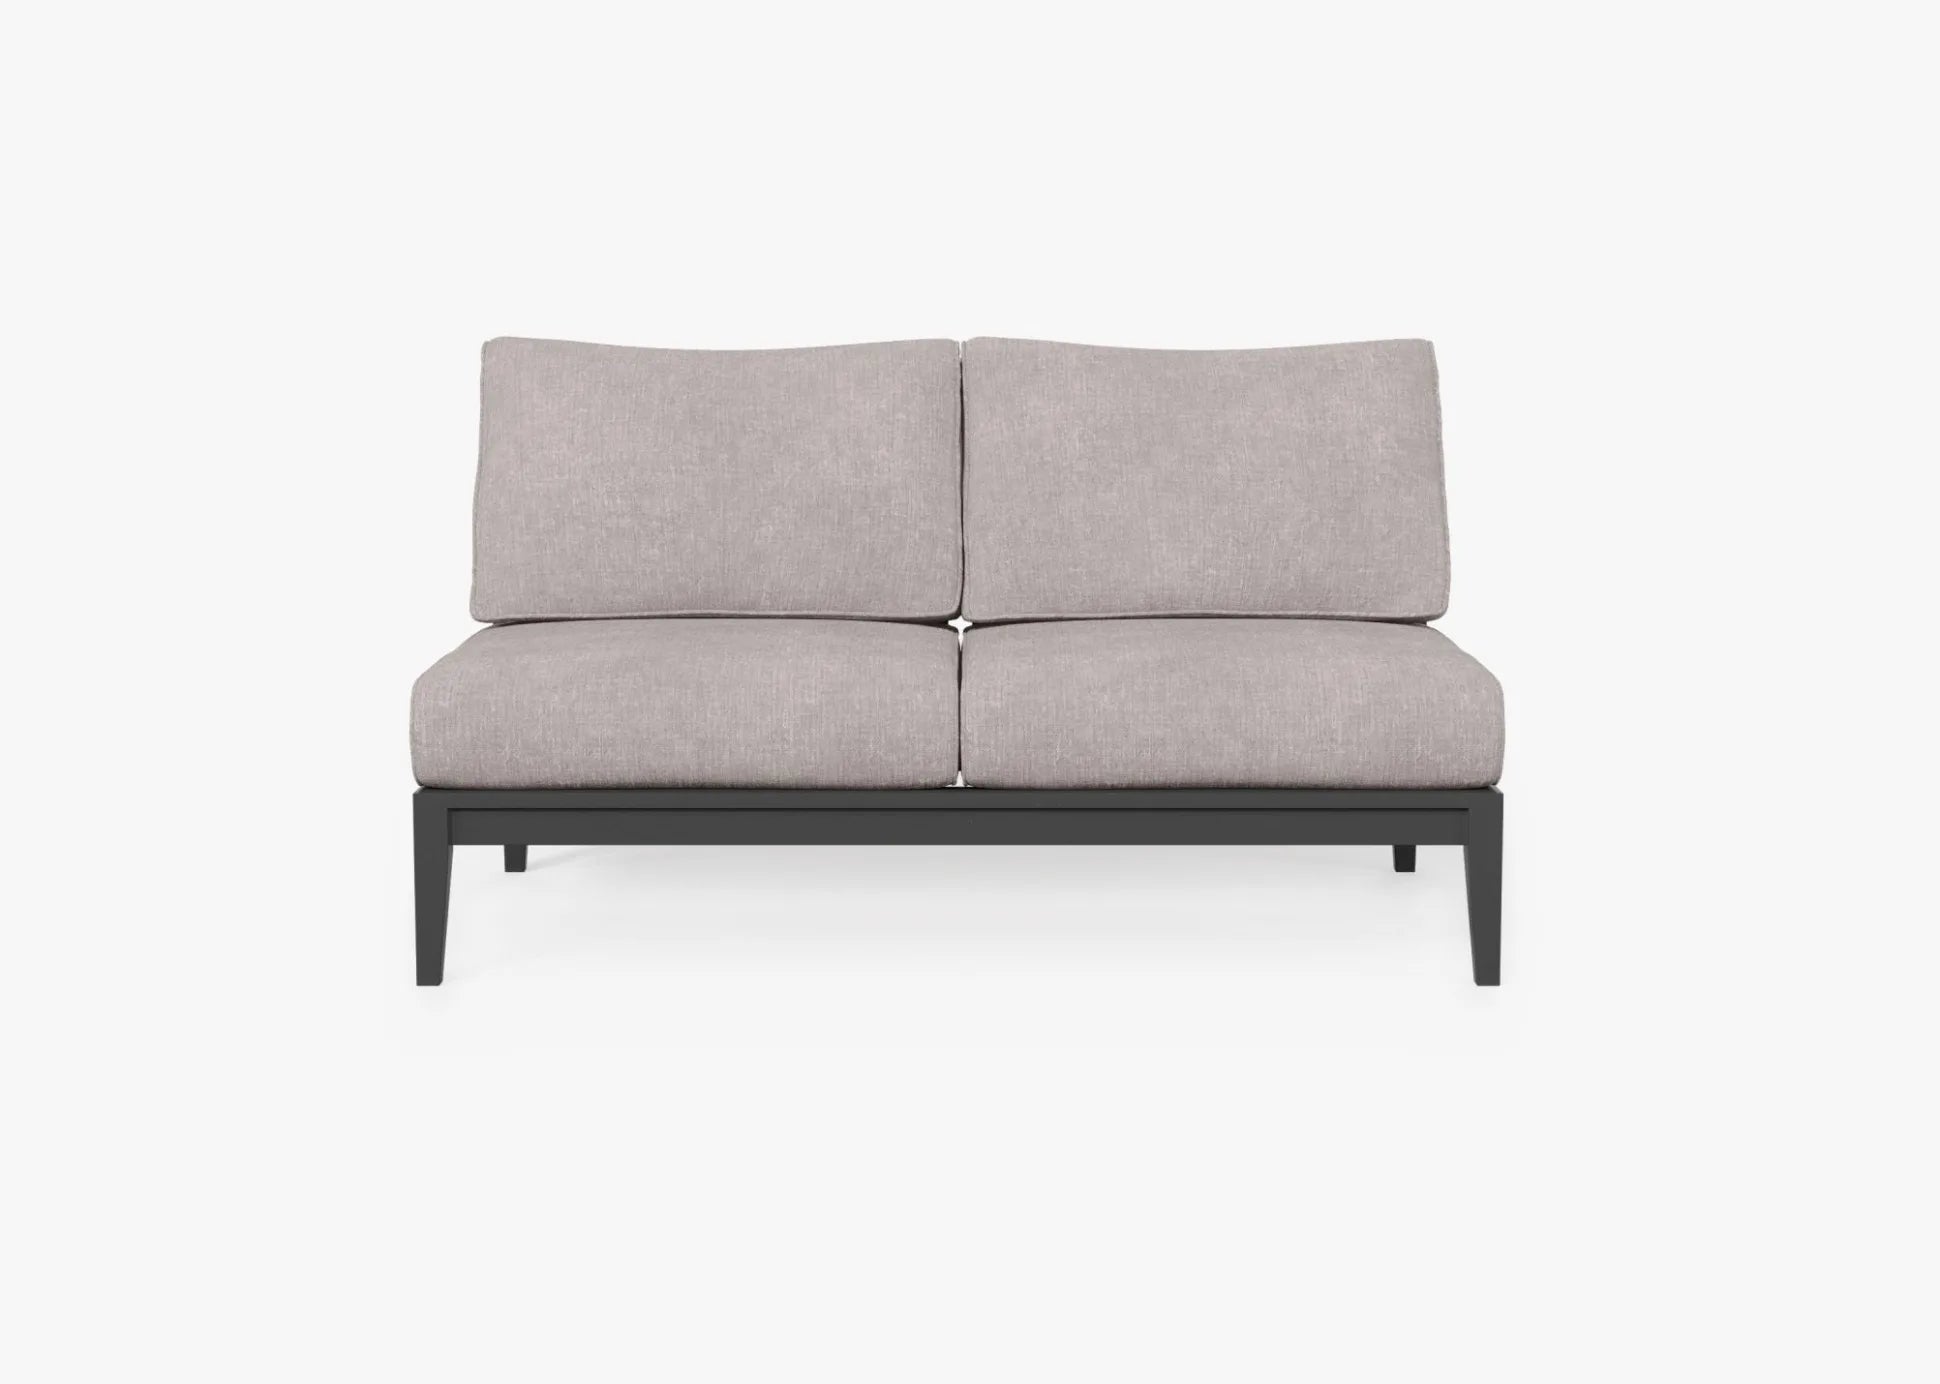 Live Outer 58" Charcoal Aluminum Outdoor Armless Loveseat With Sandstone Gray Cushion